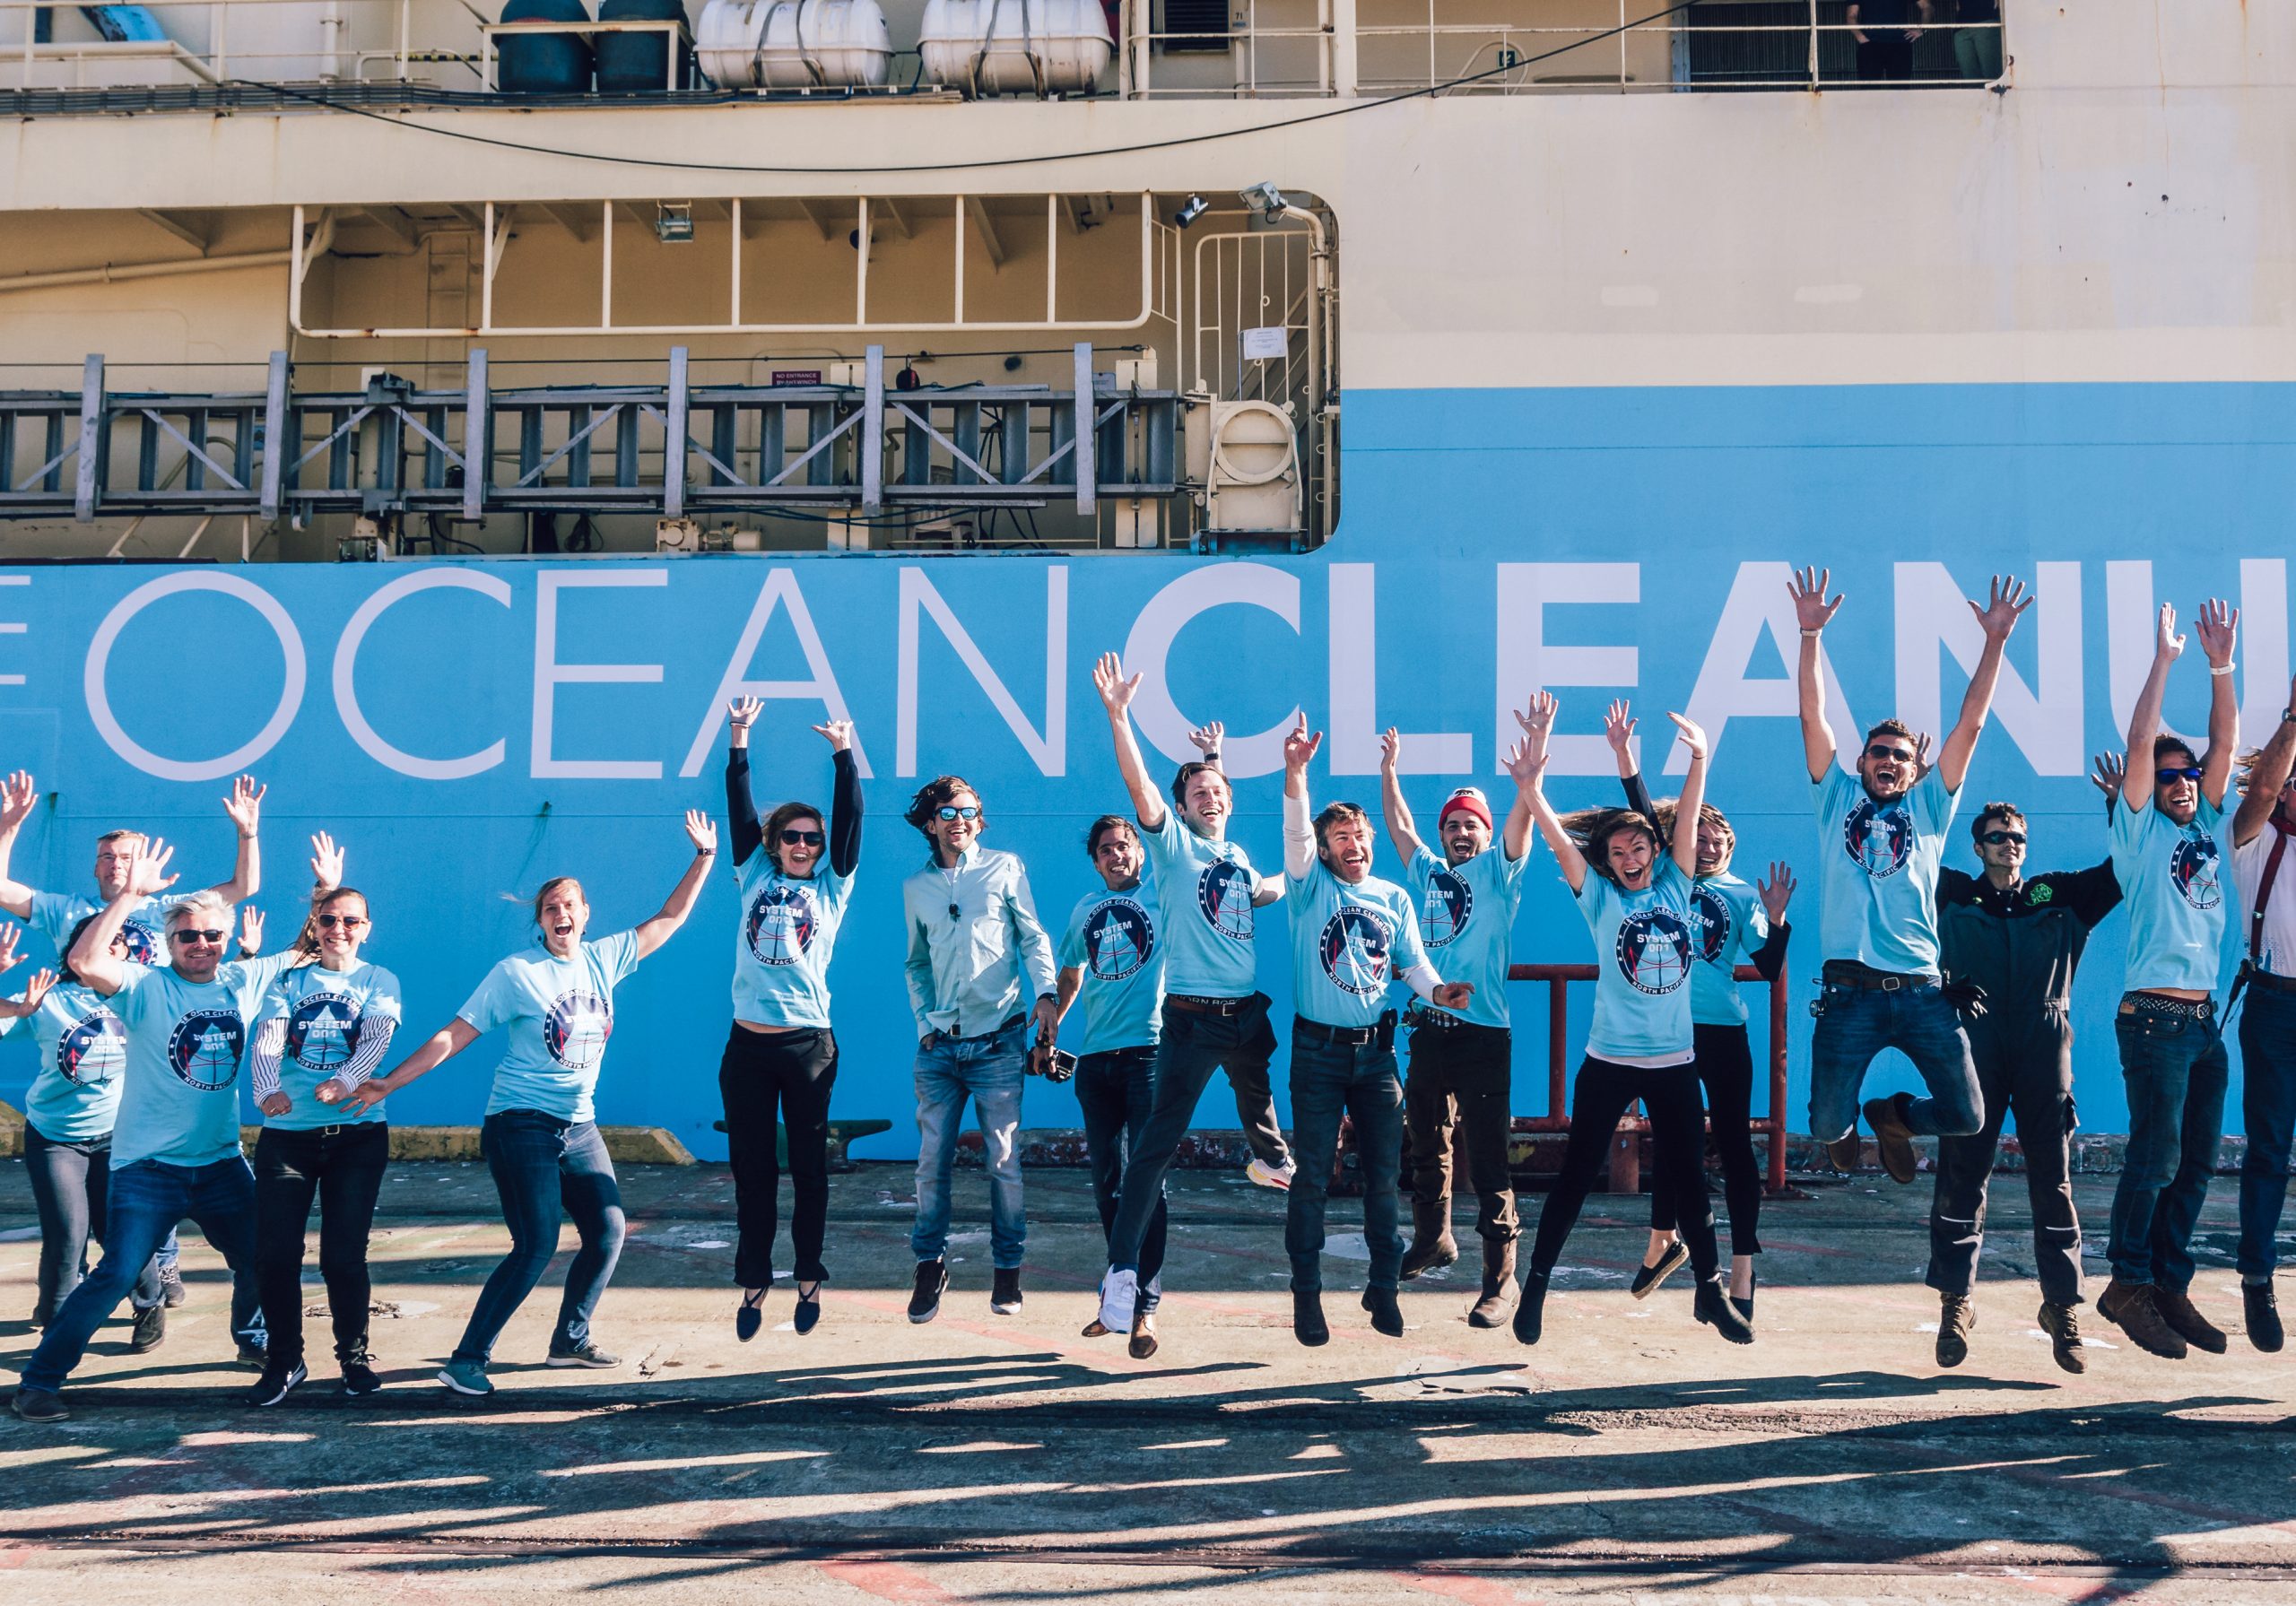 theoceancleanup.com